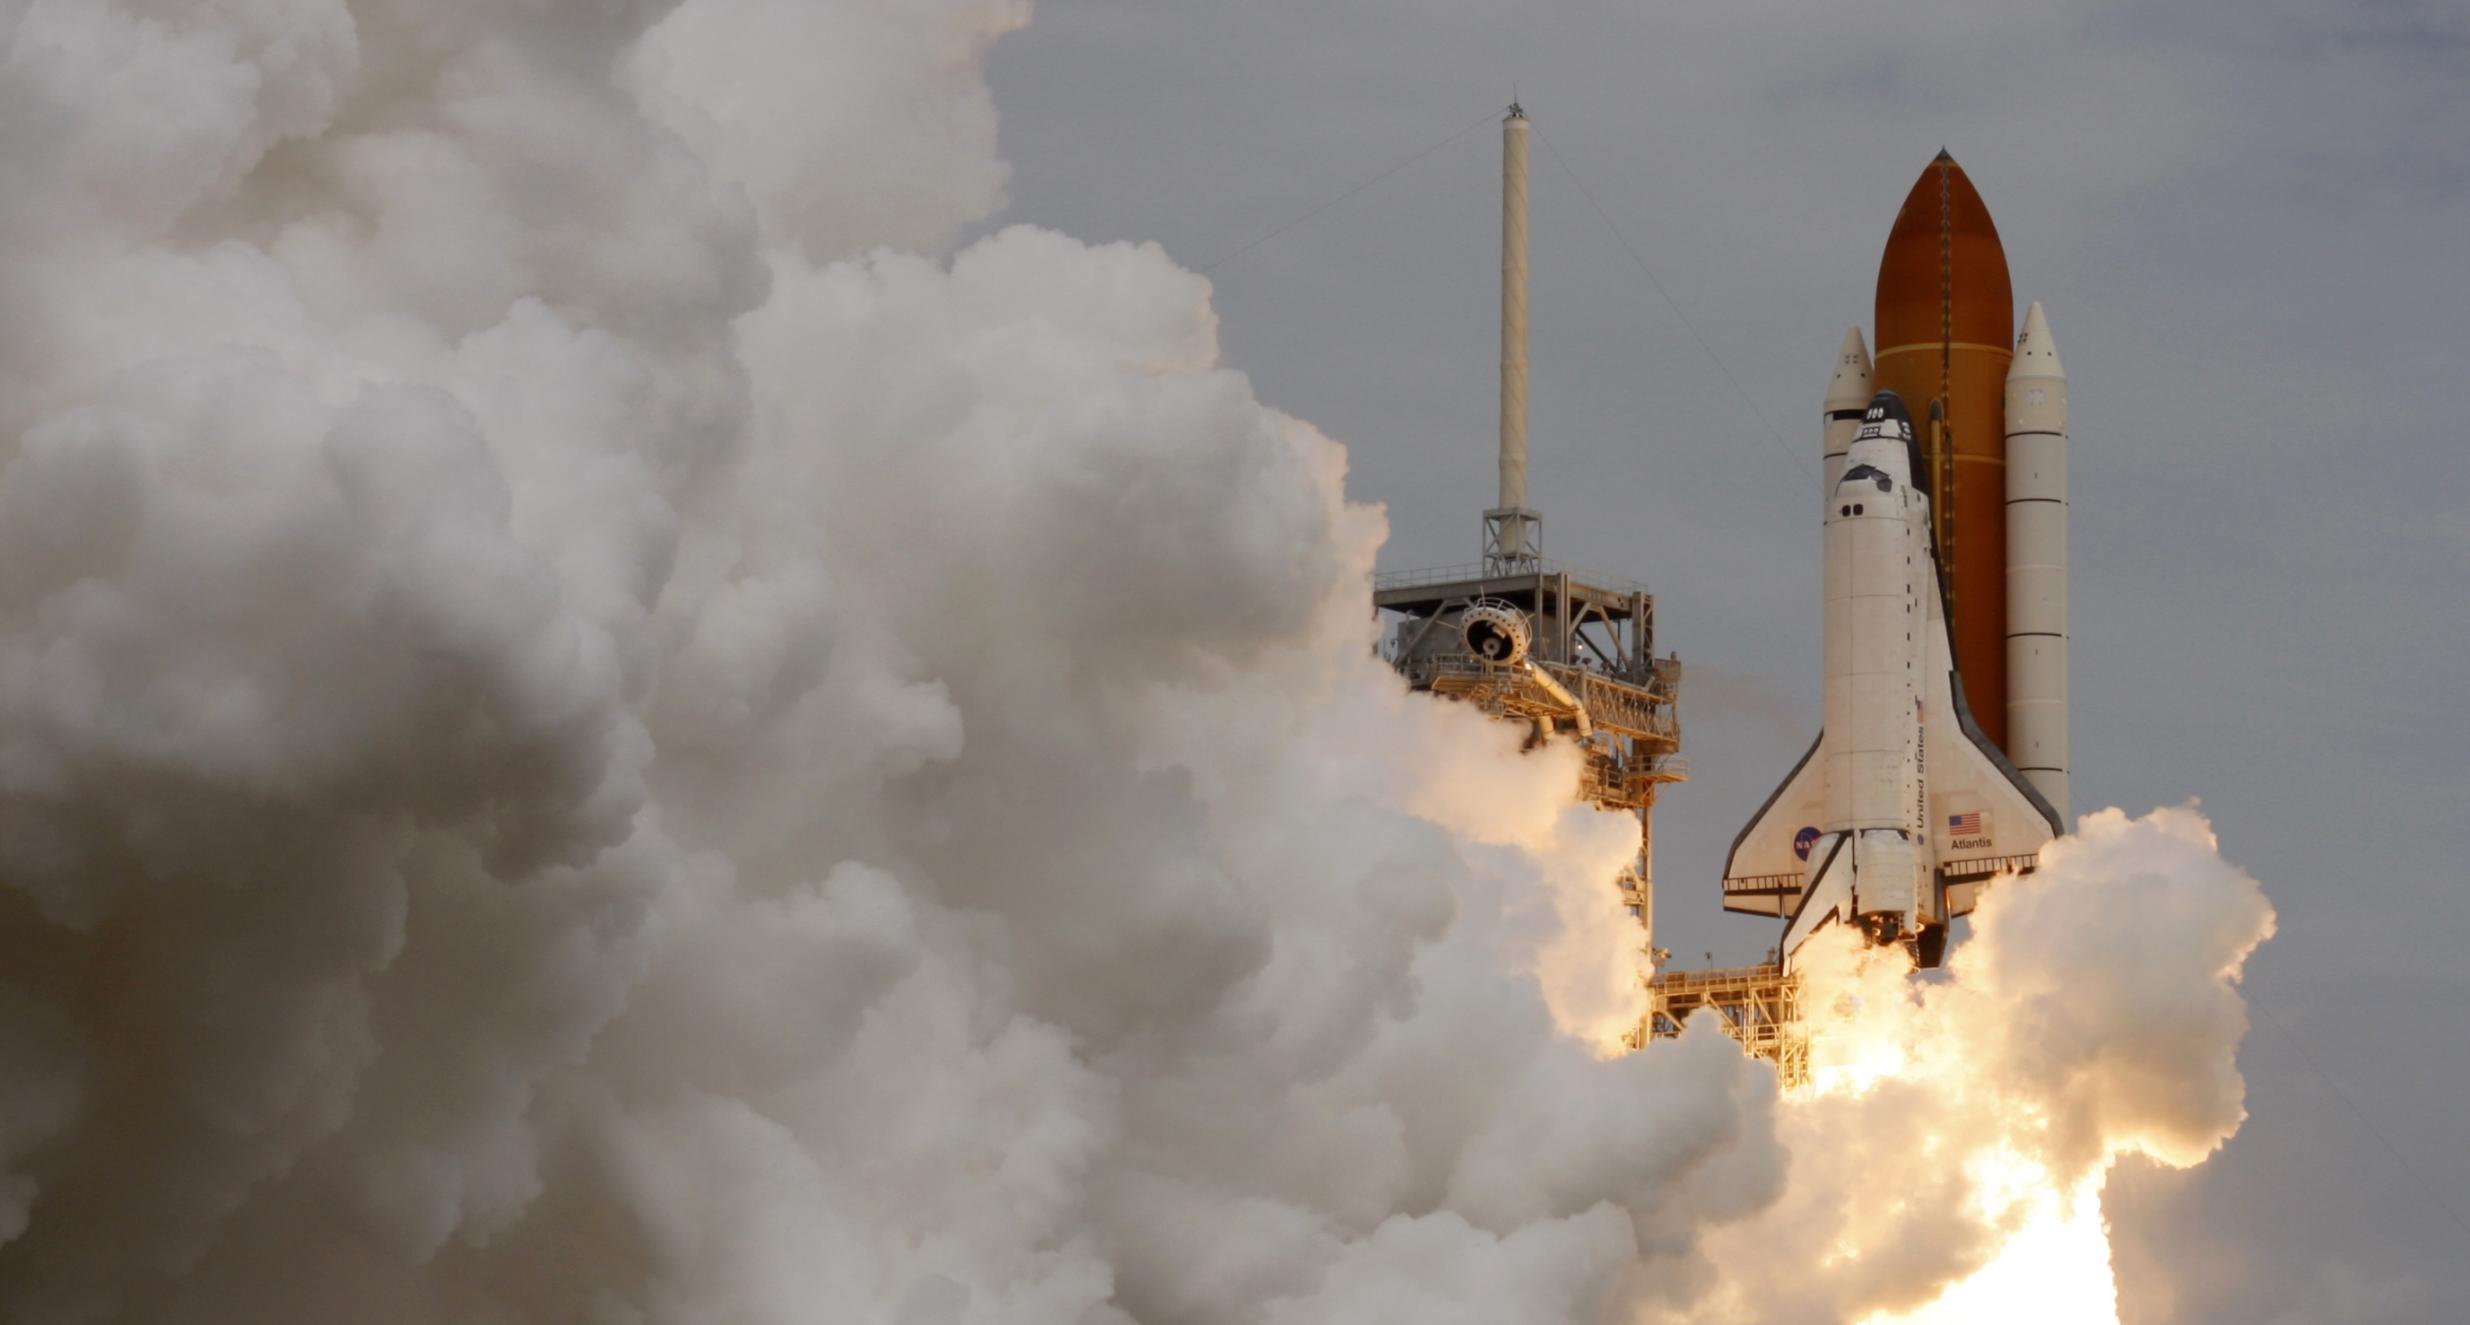 The space shuttle Atlantis STS-135 lifts off from launch pad 39A at the Kennedy Space Center in Cape Canaveral, Florida, July 8, 2011. The 12-day mission to the International Space Station is the last mission in the Space Shuttle Program. REUTERS/Scott Audette (UNITED STATES - Tags: SCI TECH TRANSPORT)